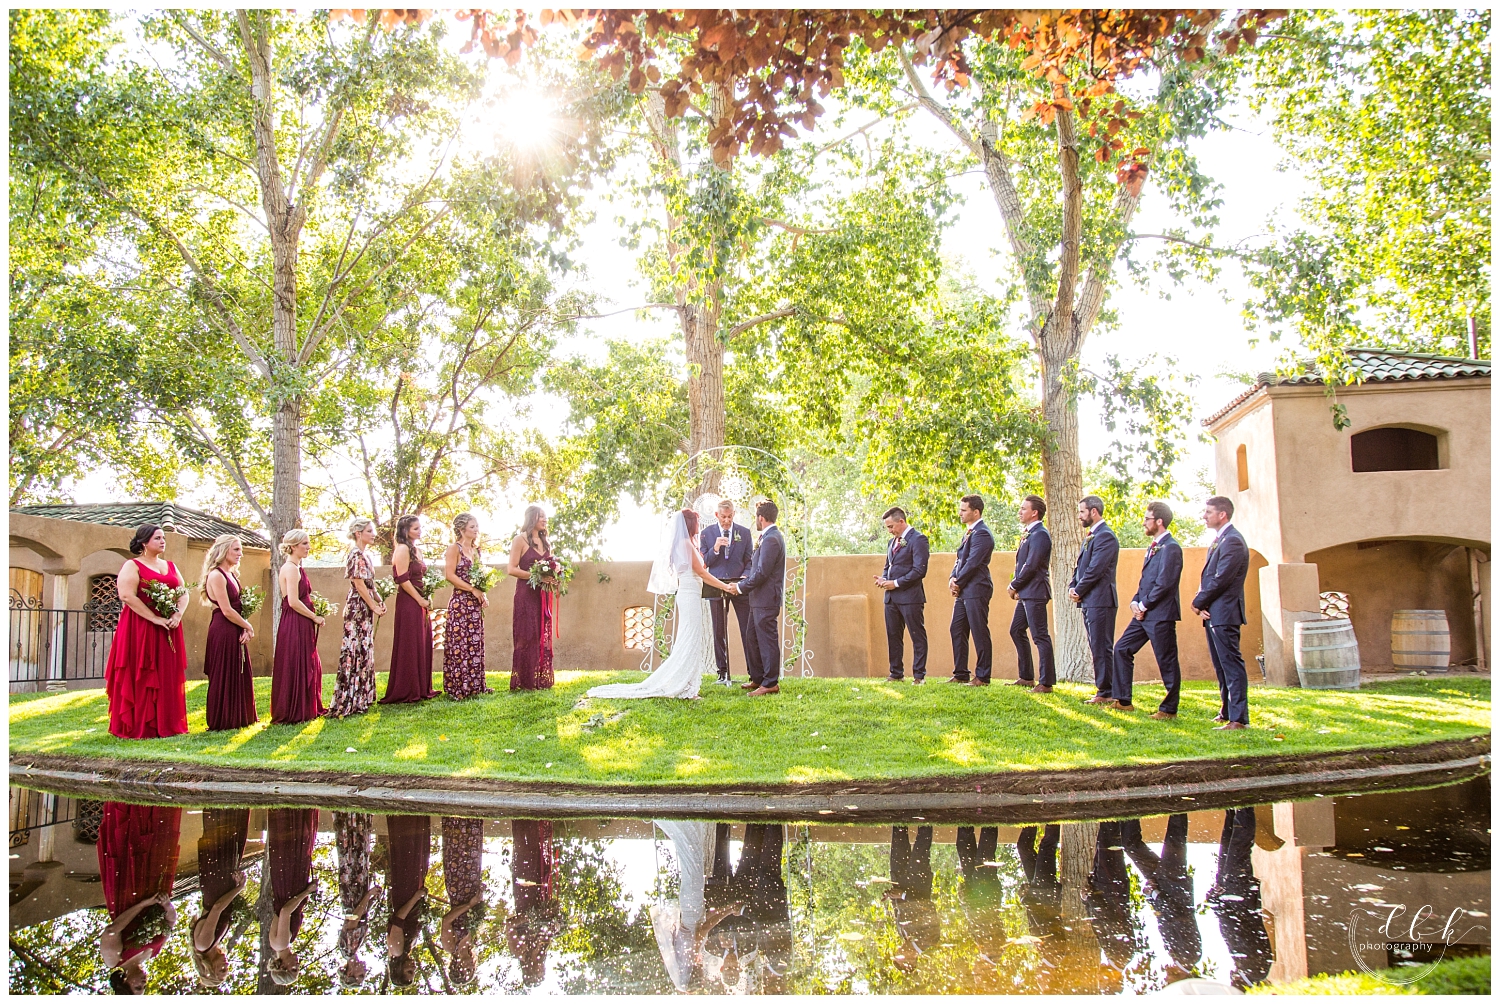 reflection of wedding party in the water at pond at Casa Rondena Winery wedding ceremony